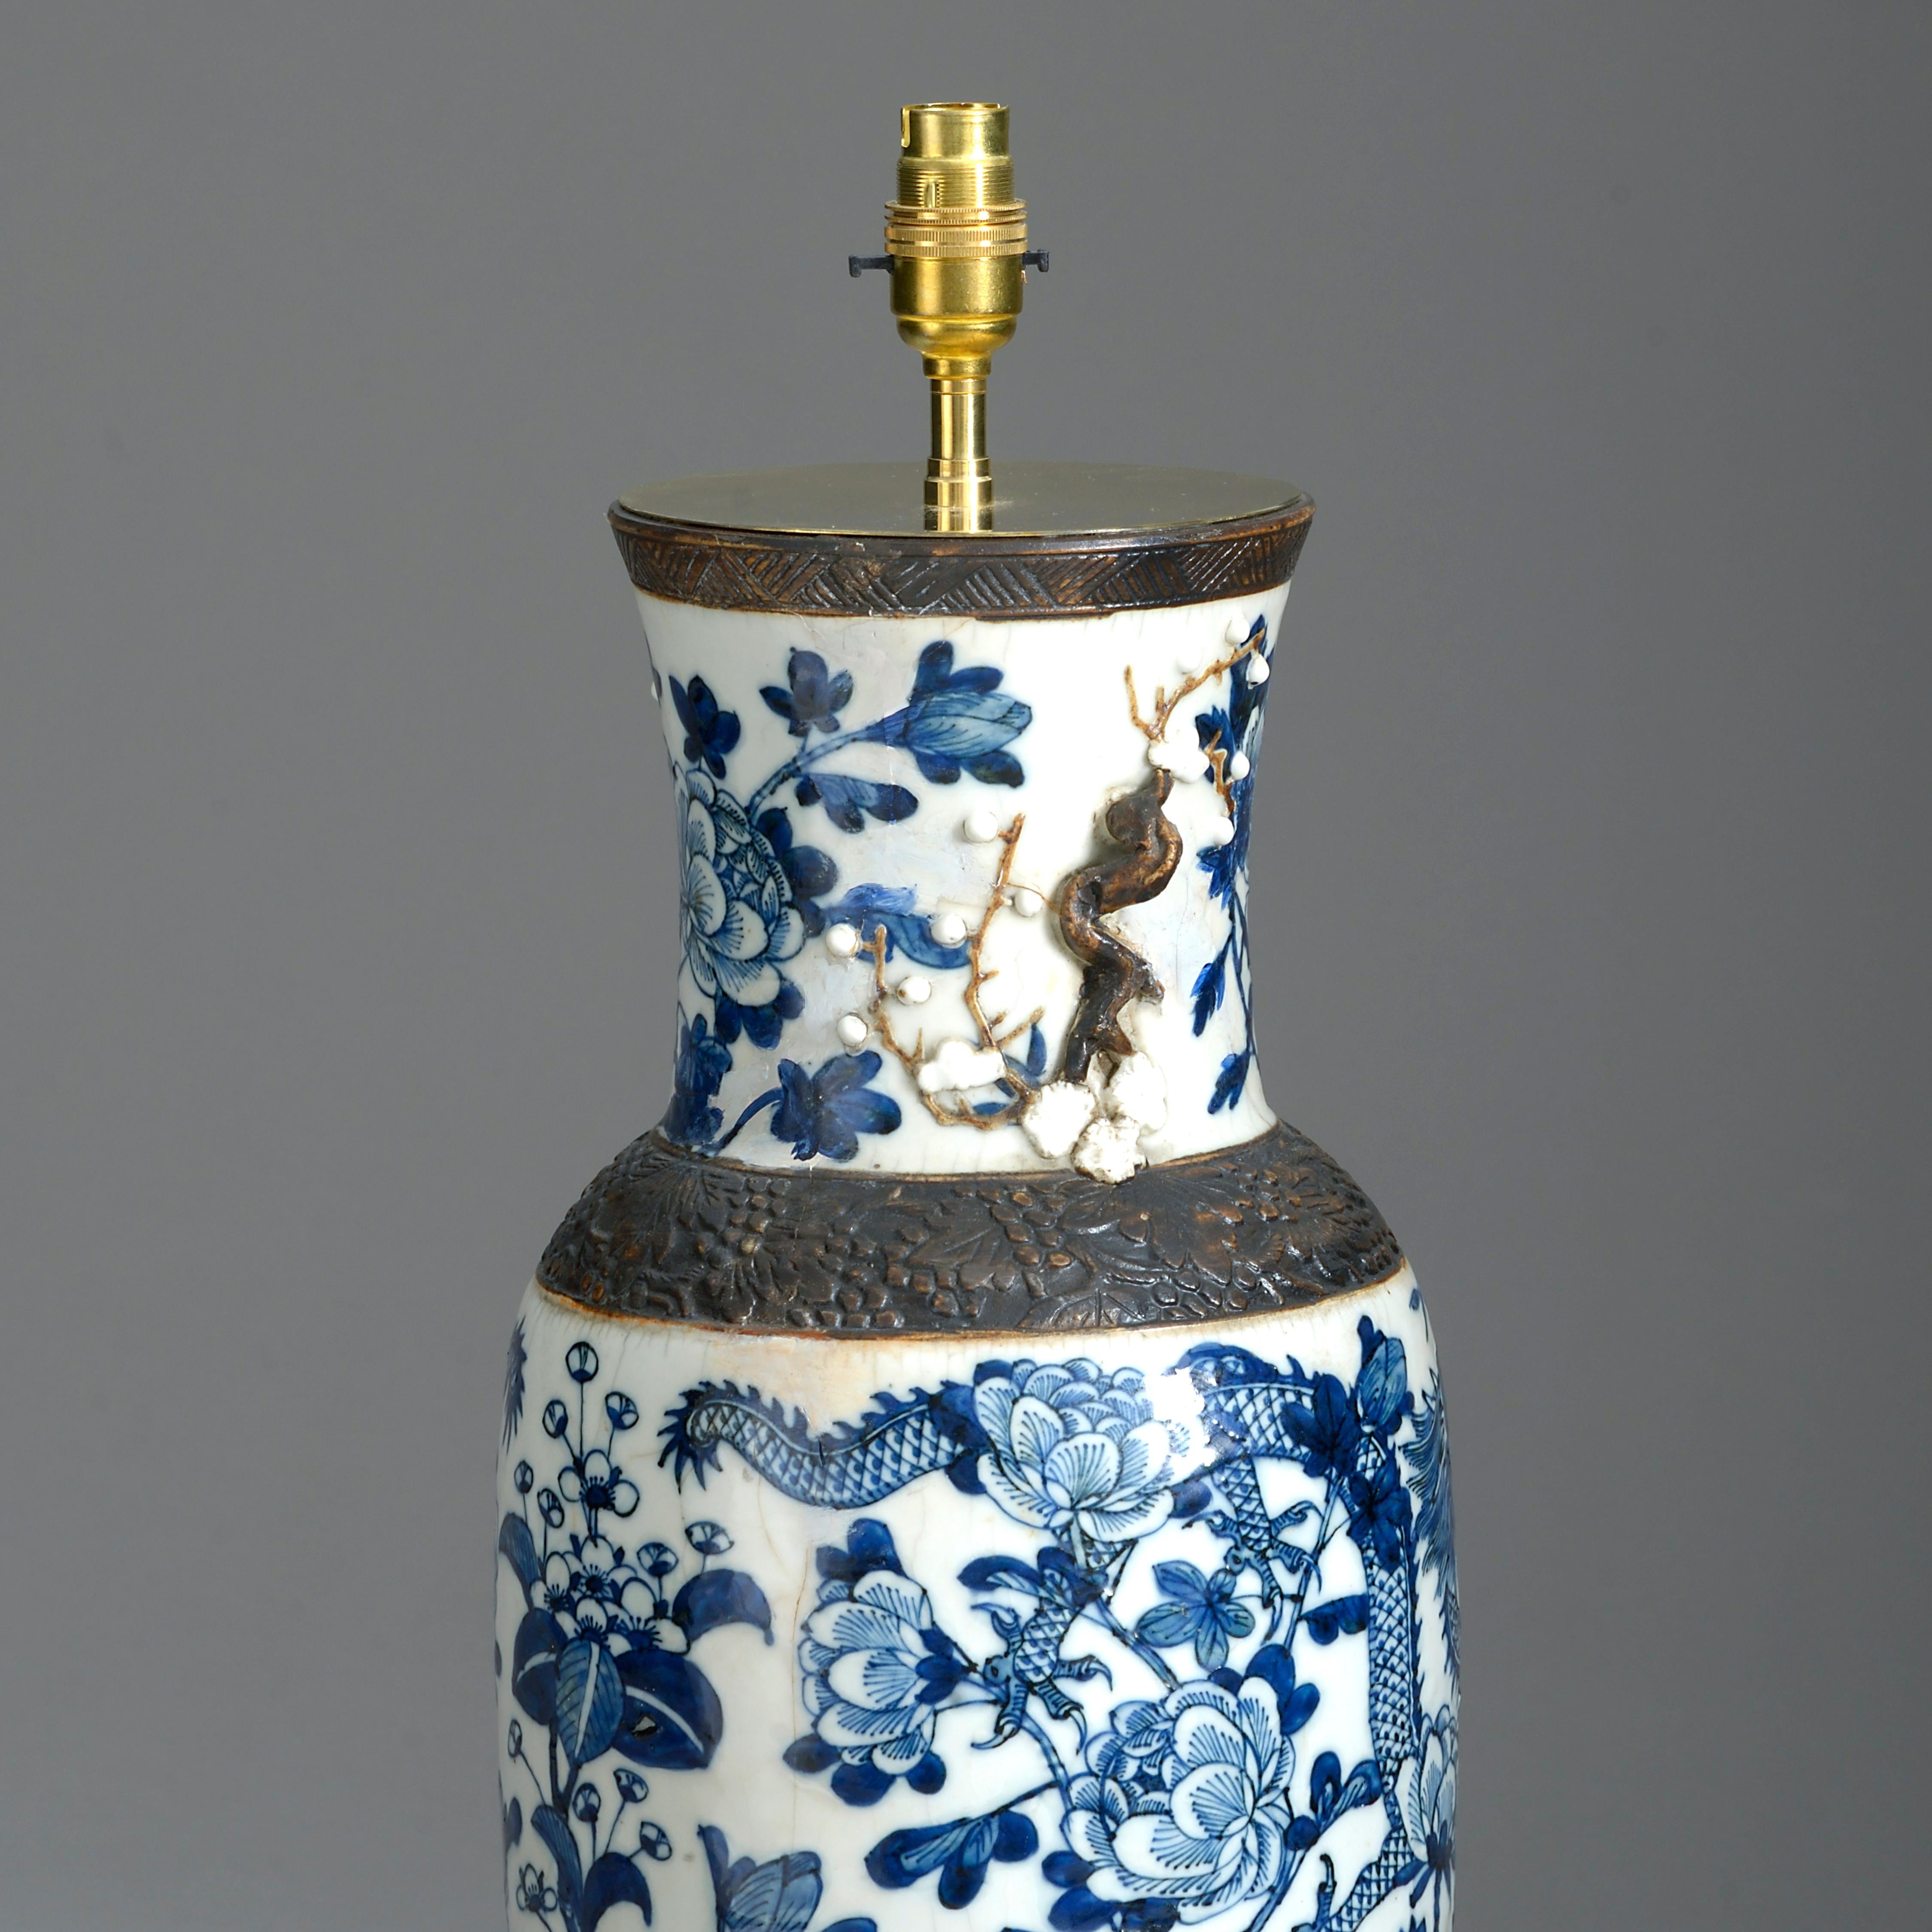 Chinese Export Mid-19th Century Blue and White Porcelain Vase Lamp